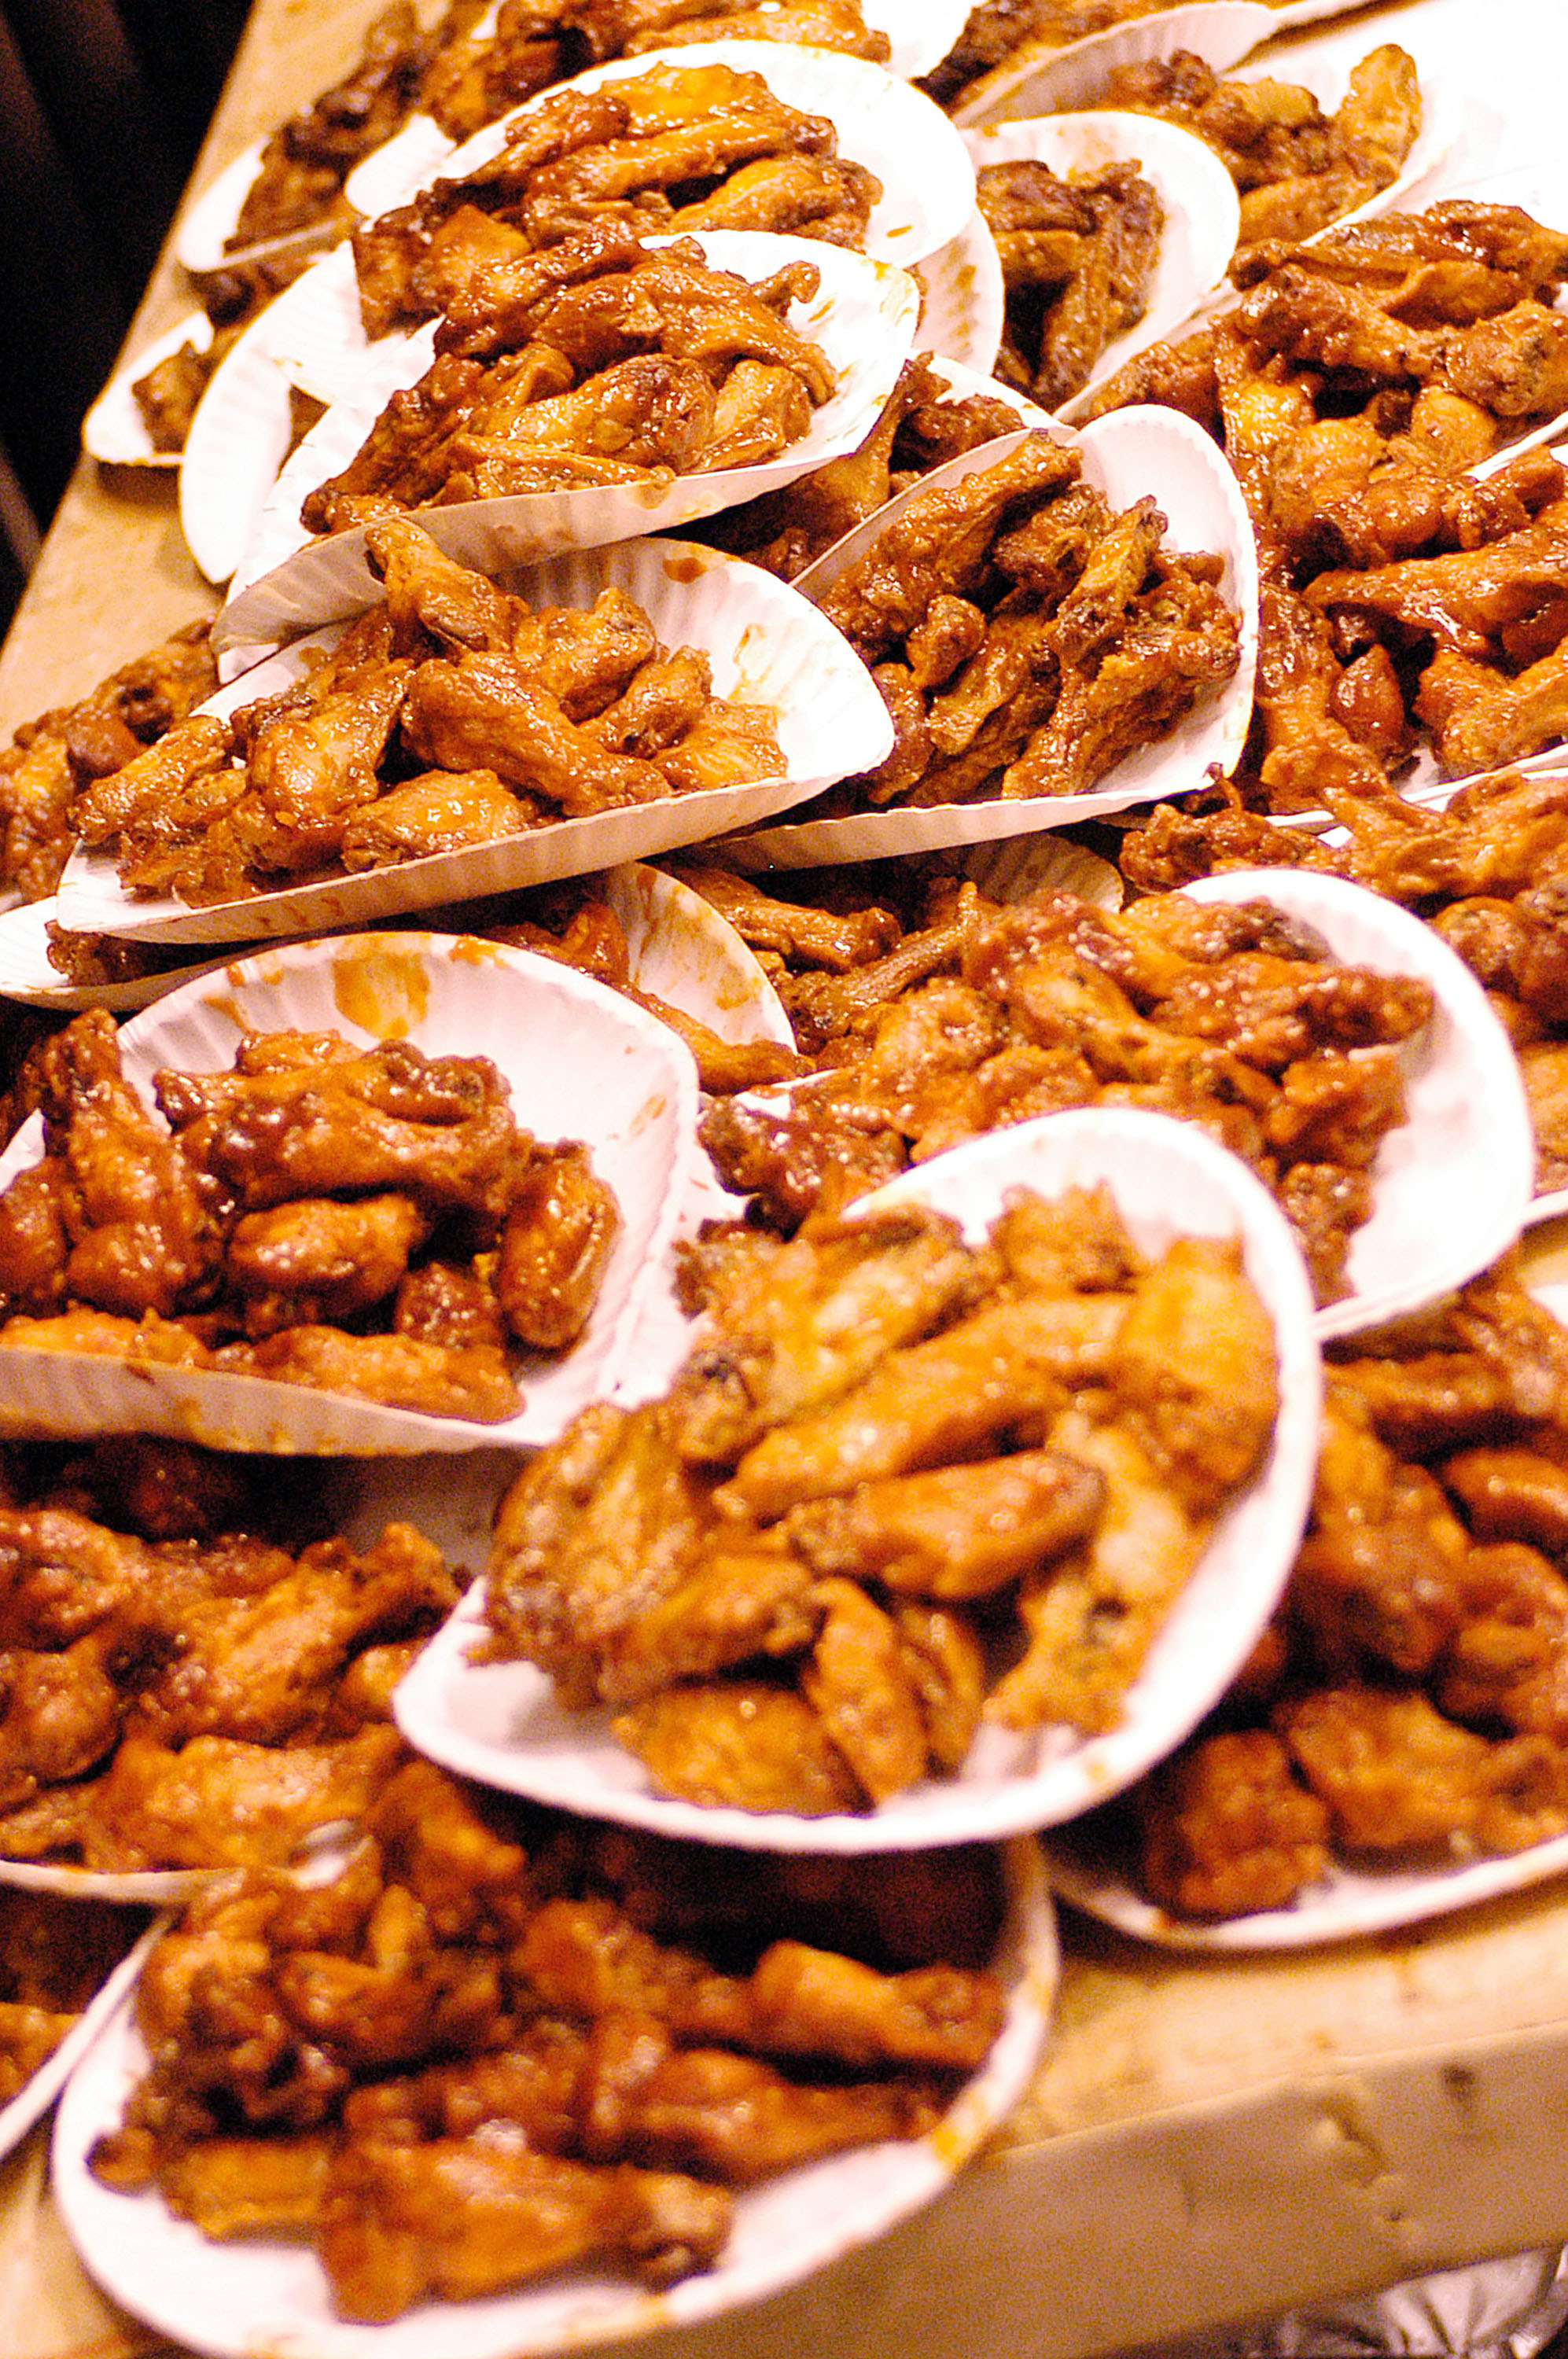 The “Wing Bowl” Buffalo Wing Eating Contest Is Held In Philadelphia